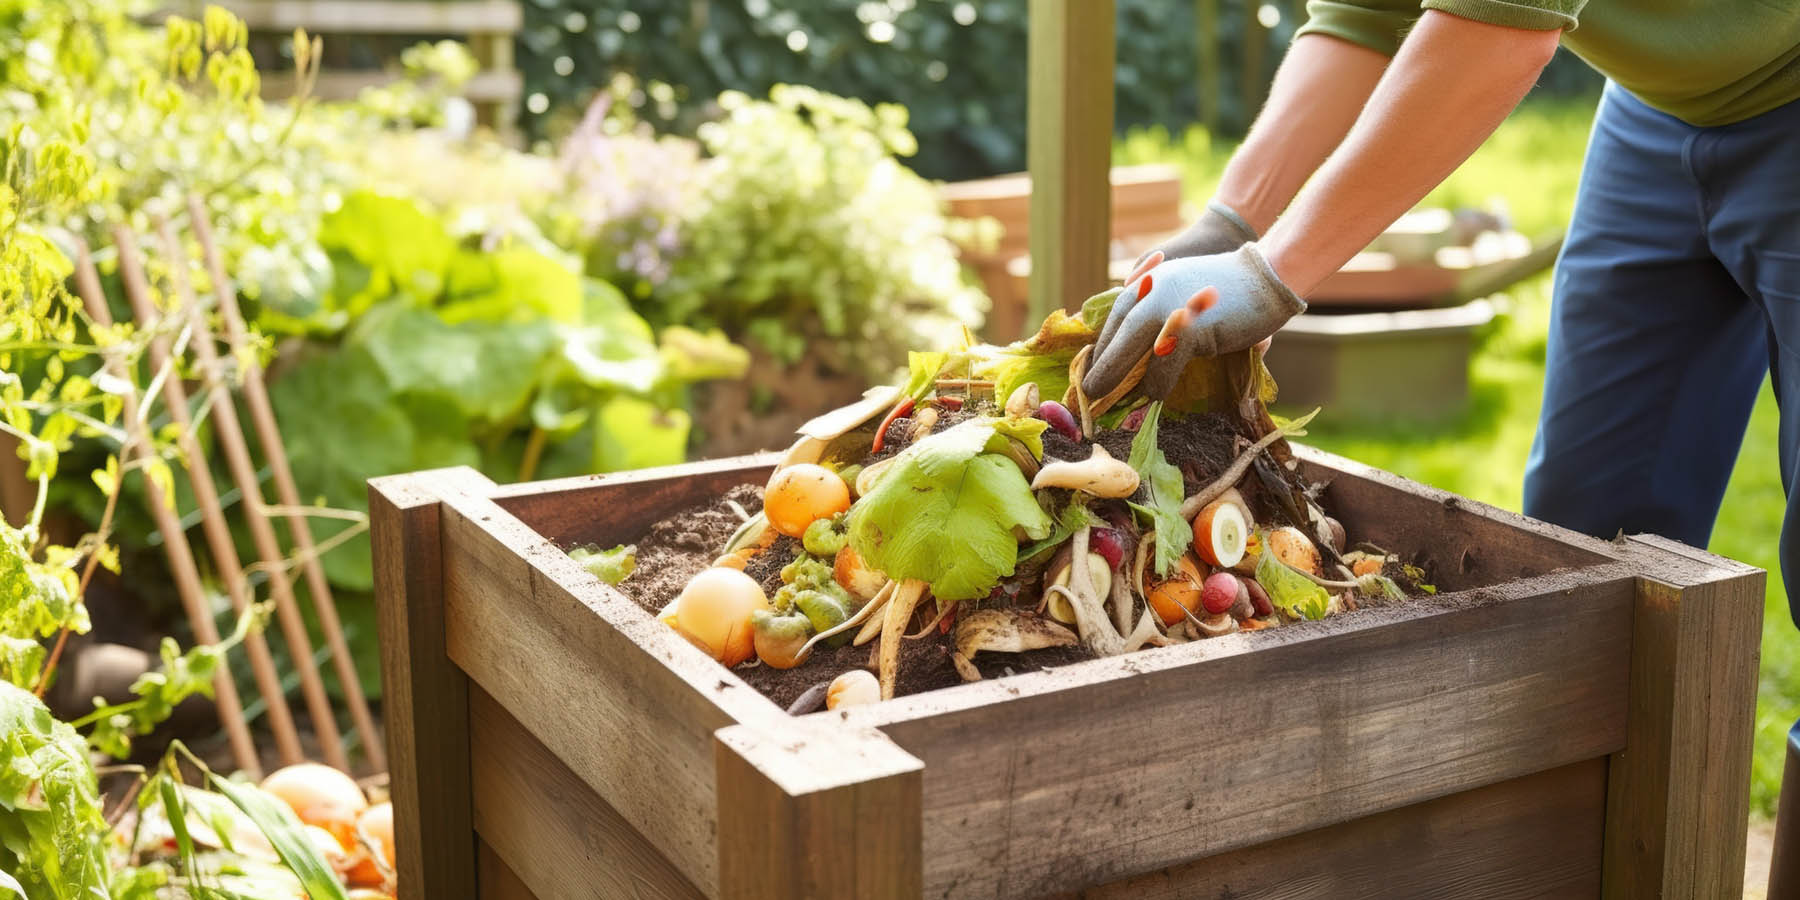 Installing and Maintaining a Home Compost Bin